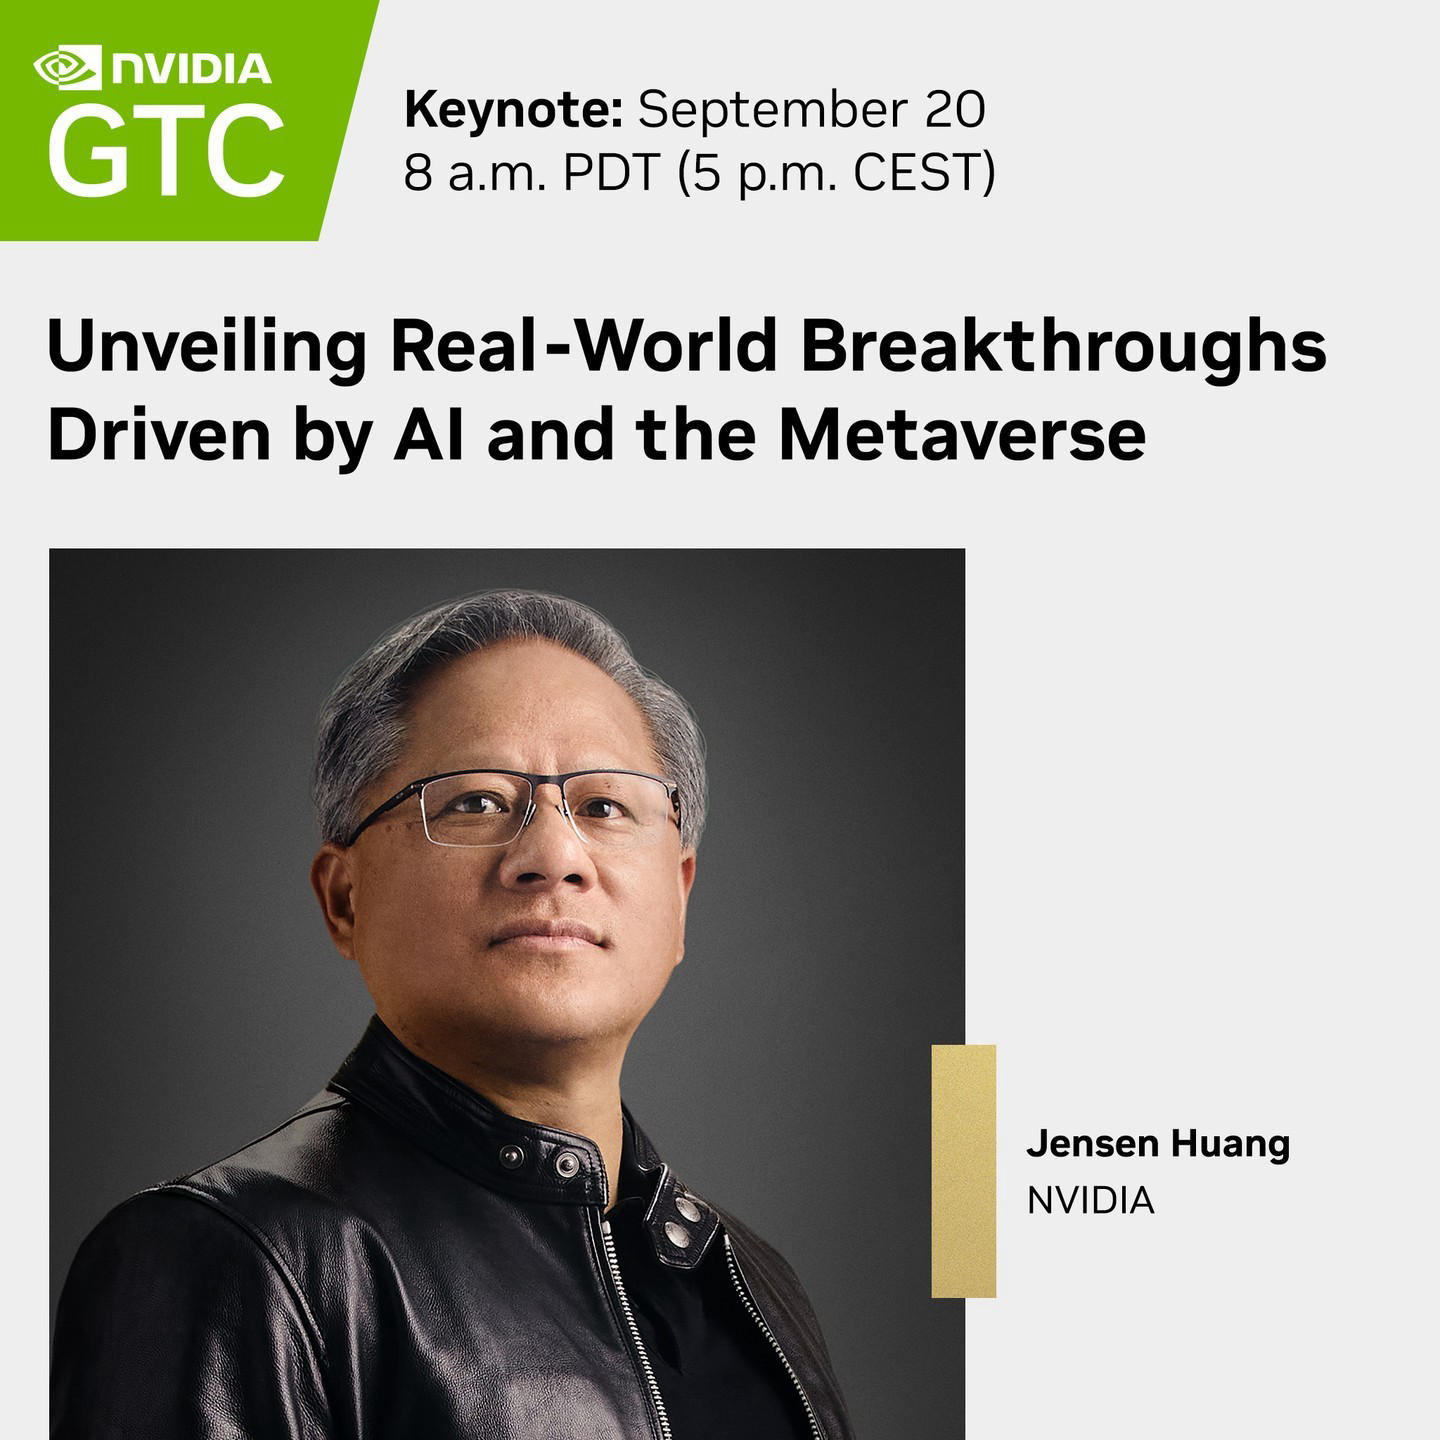 image  1 NVIDIA - Save the date for the #GTC22 keynote